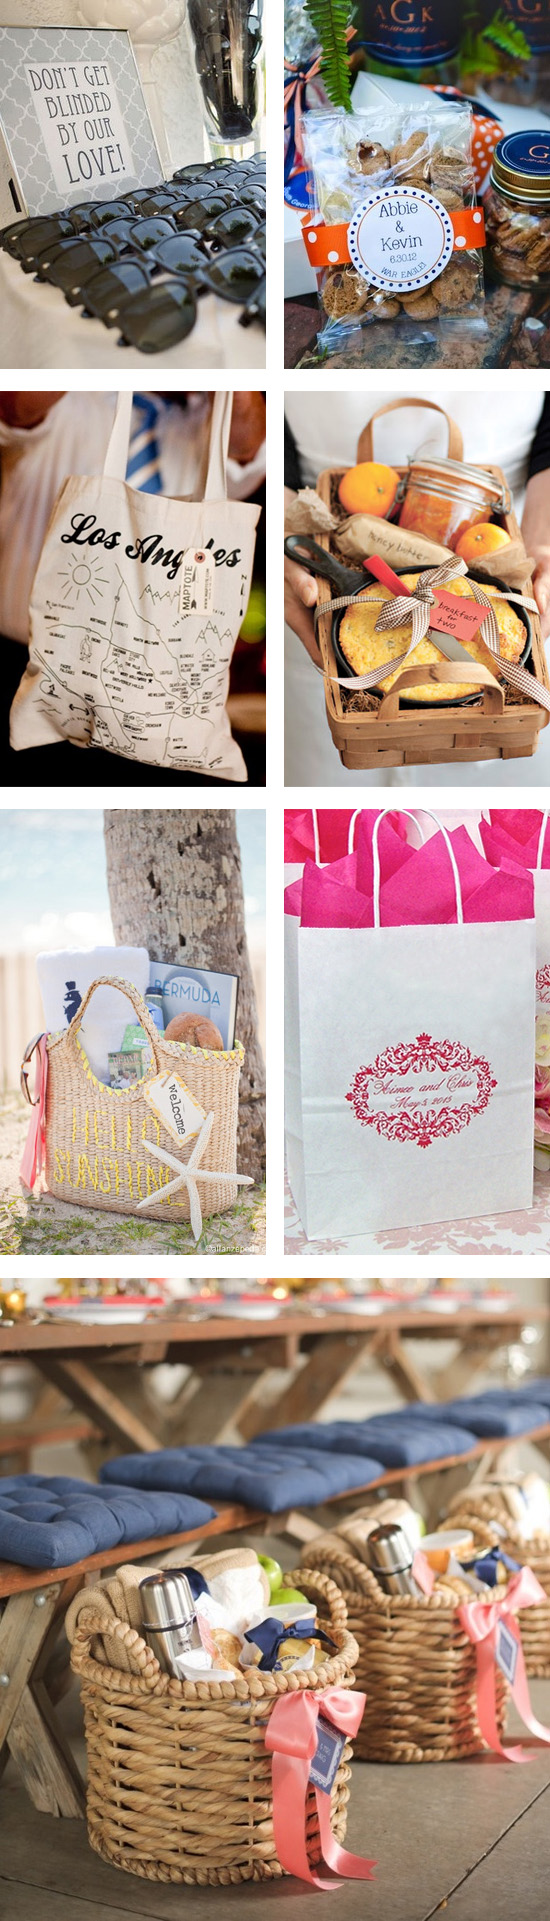 Wedding Welcome Gift Bags, Ideas, and Inspiration